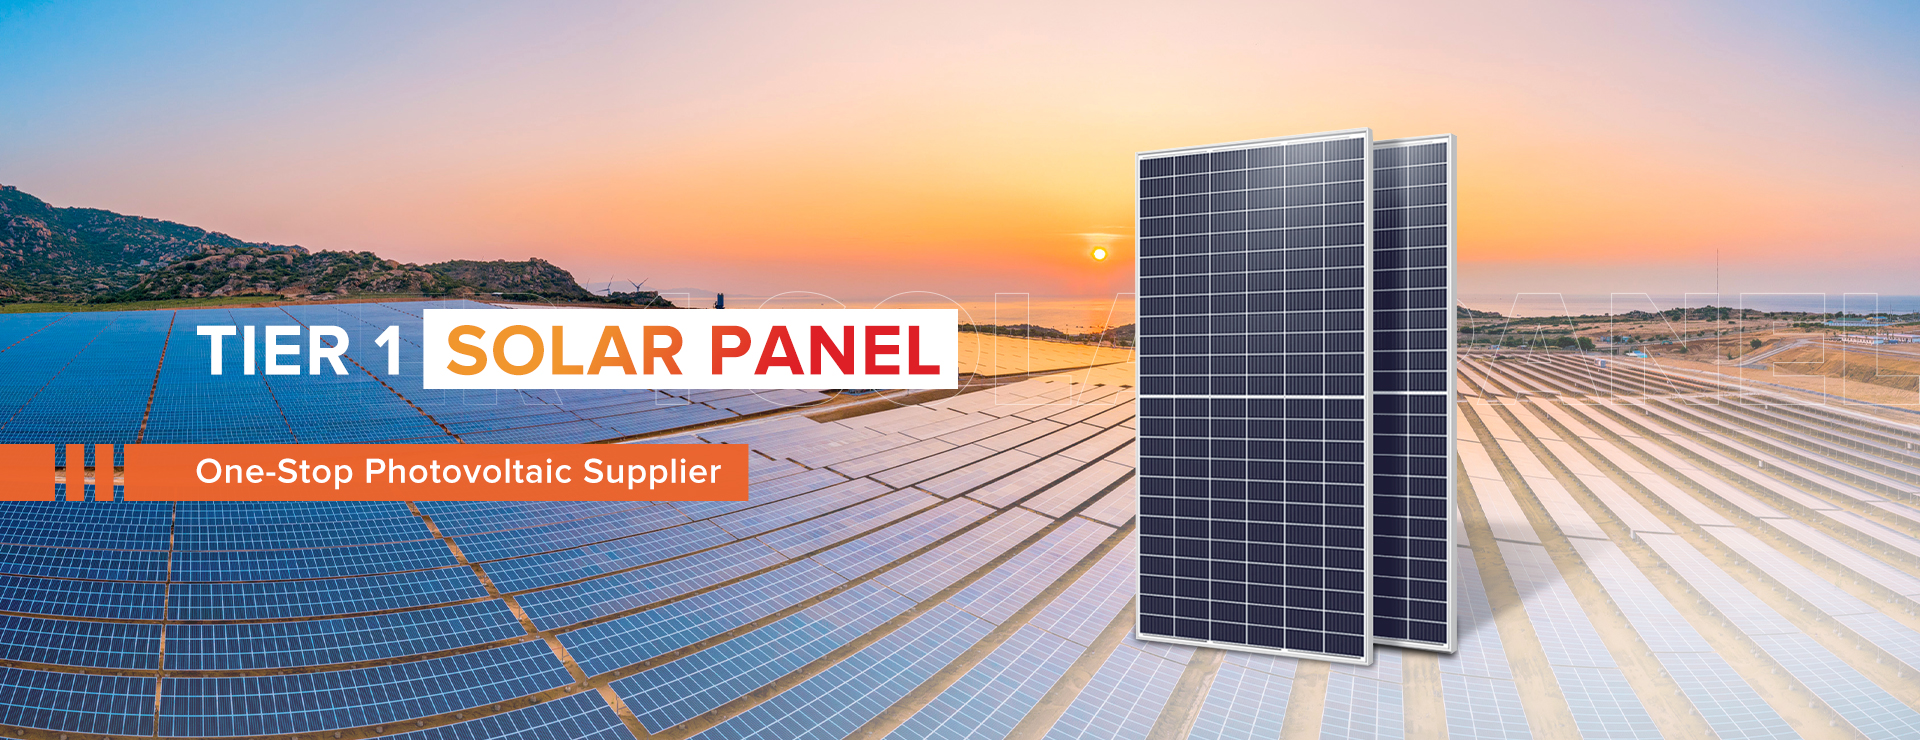 One-Stop Photovoltaic Supplier